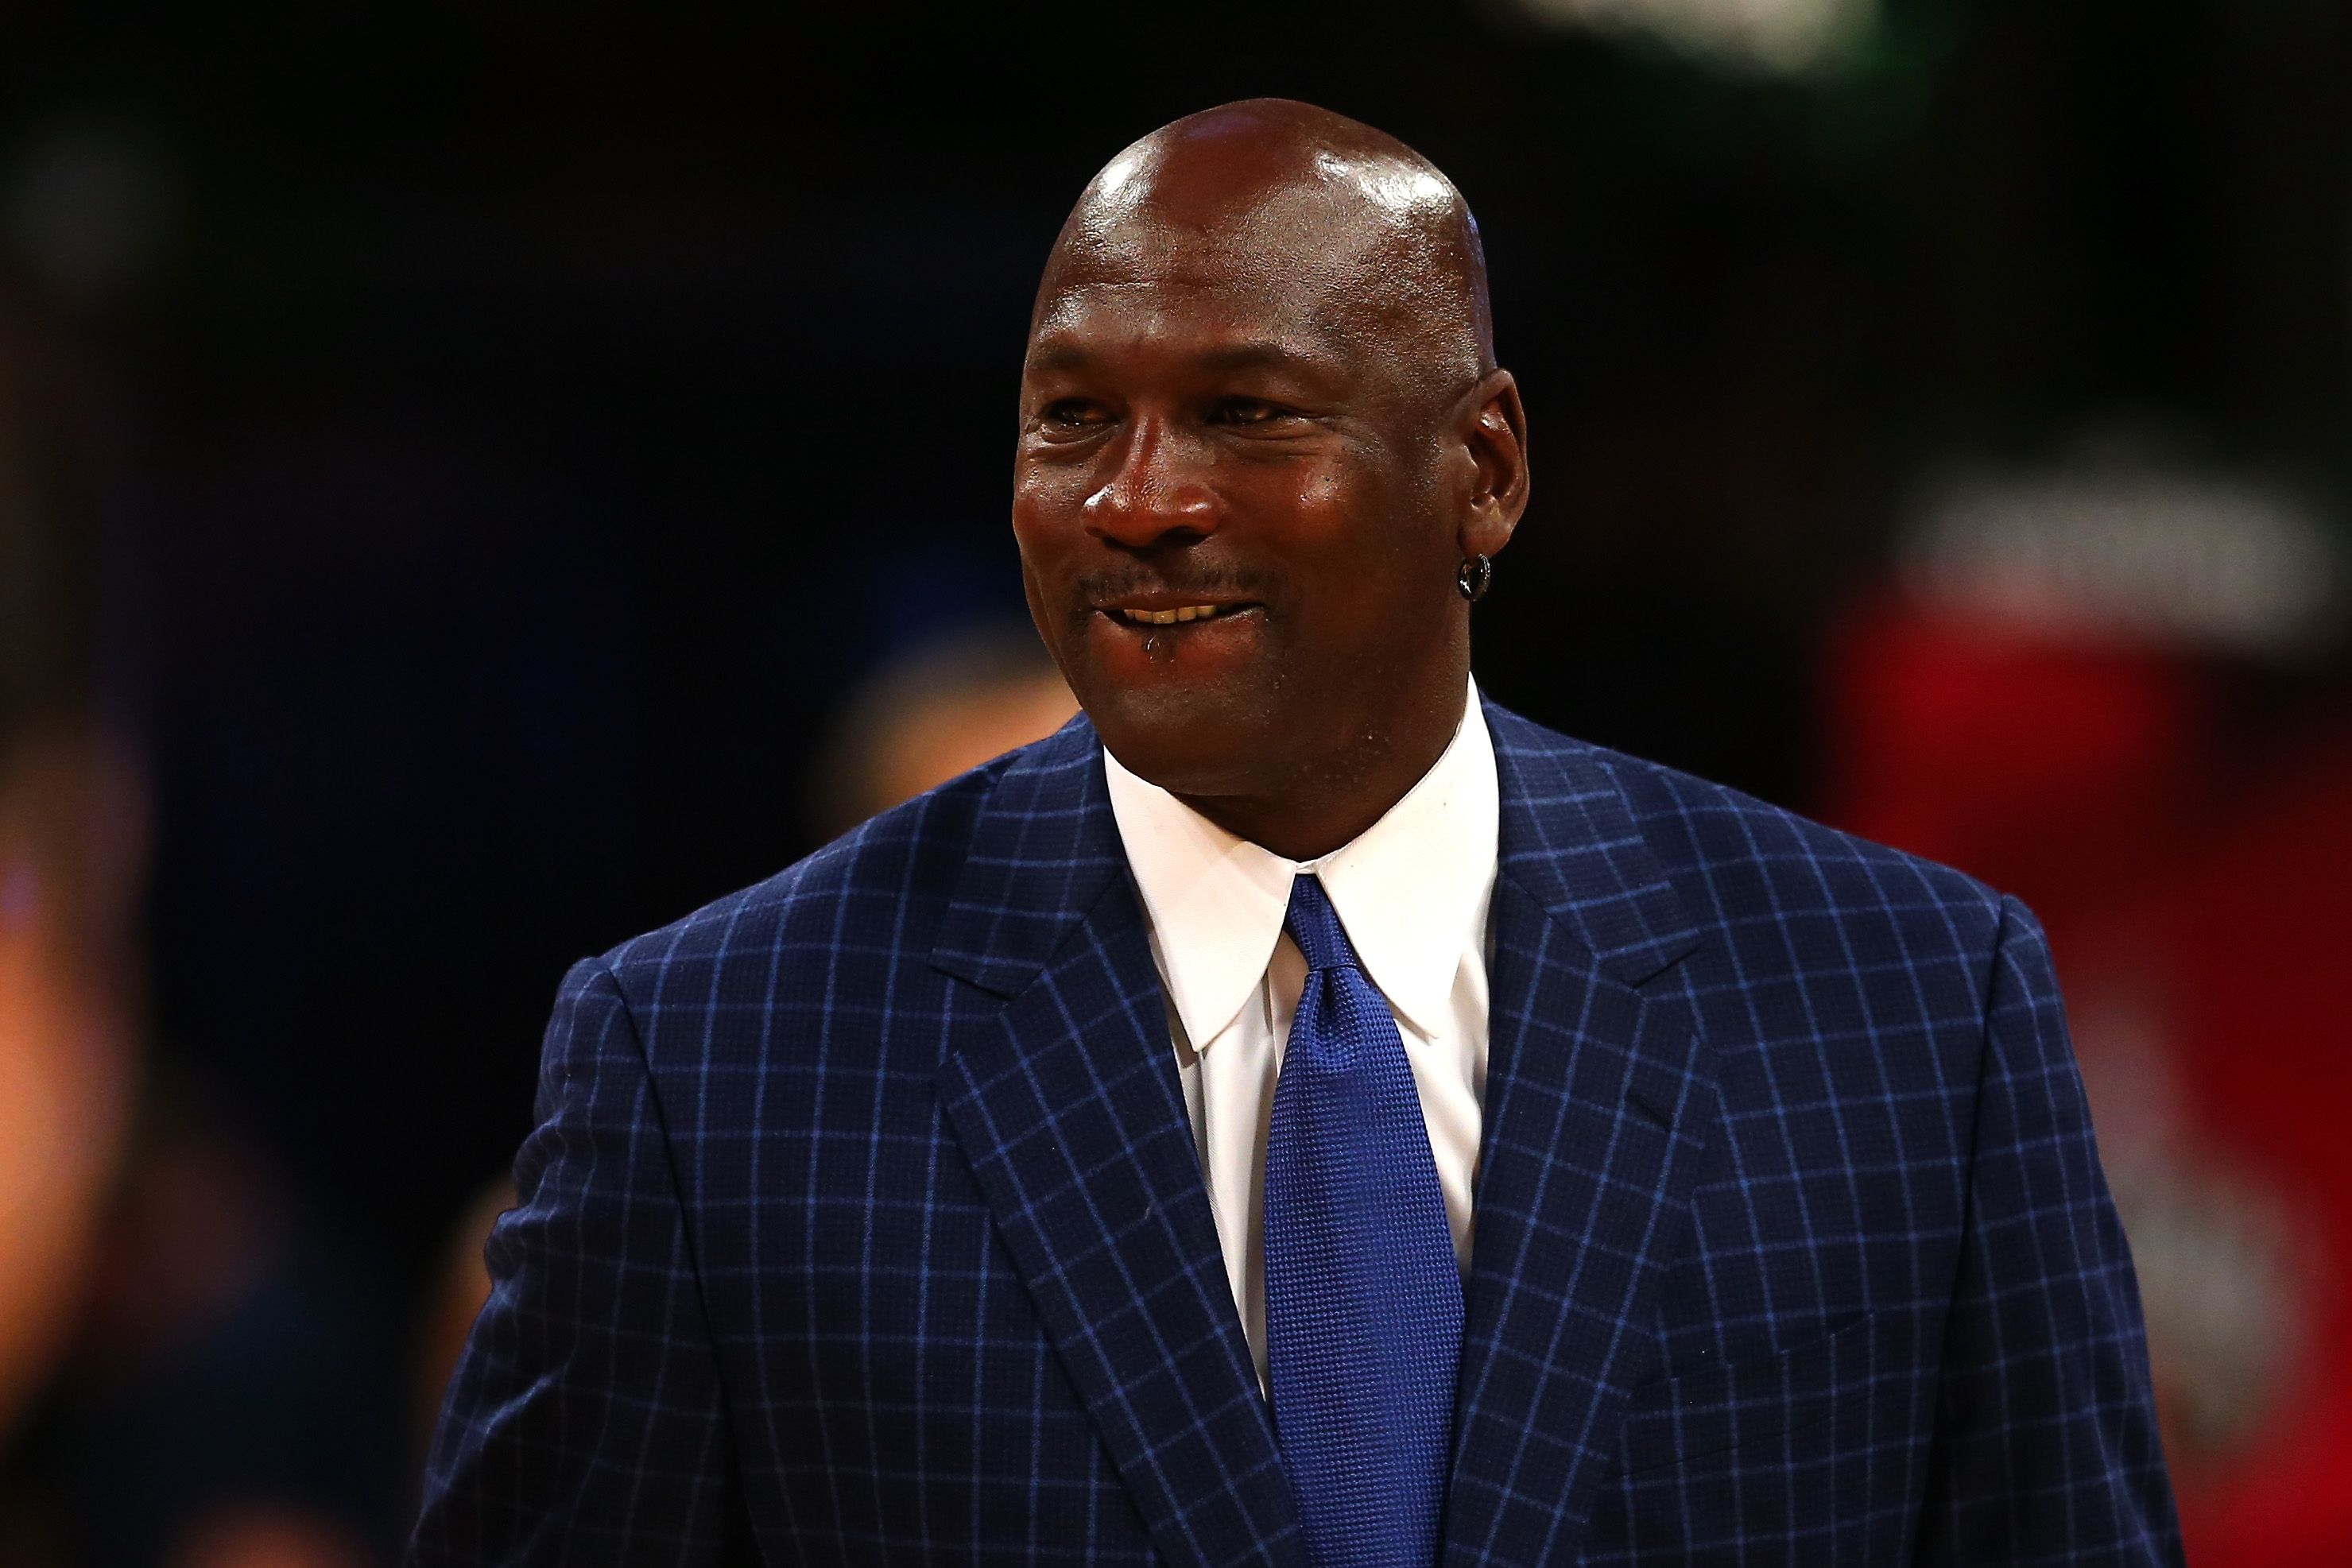 Michael Jordan walking off the court at the NBA All-Star Game 2016 at the Air Canada Centre on February 14, 2016 | Photo: Getty Images